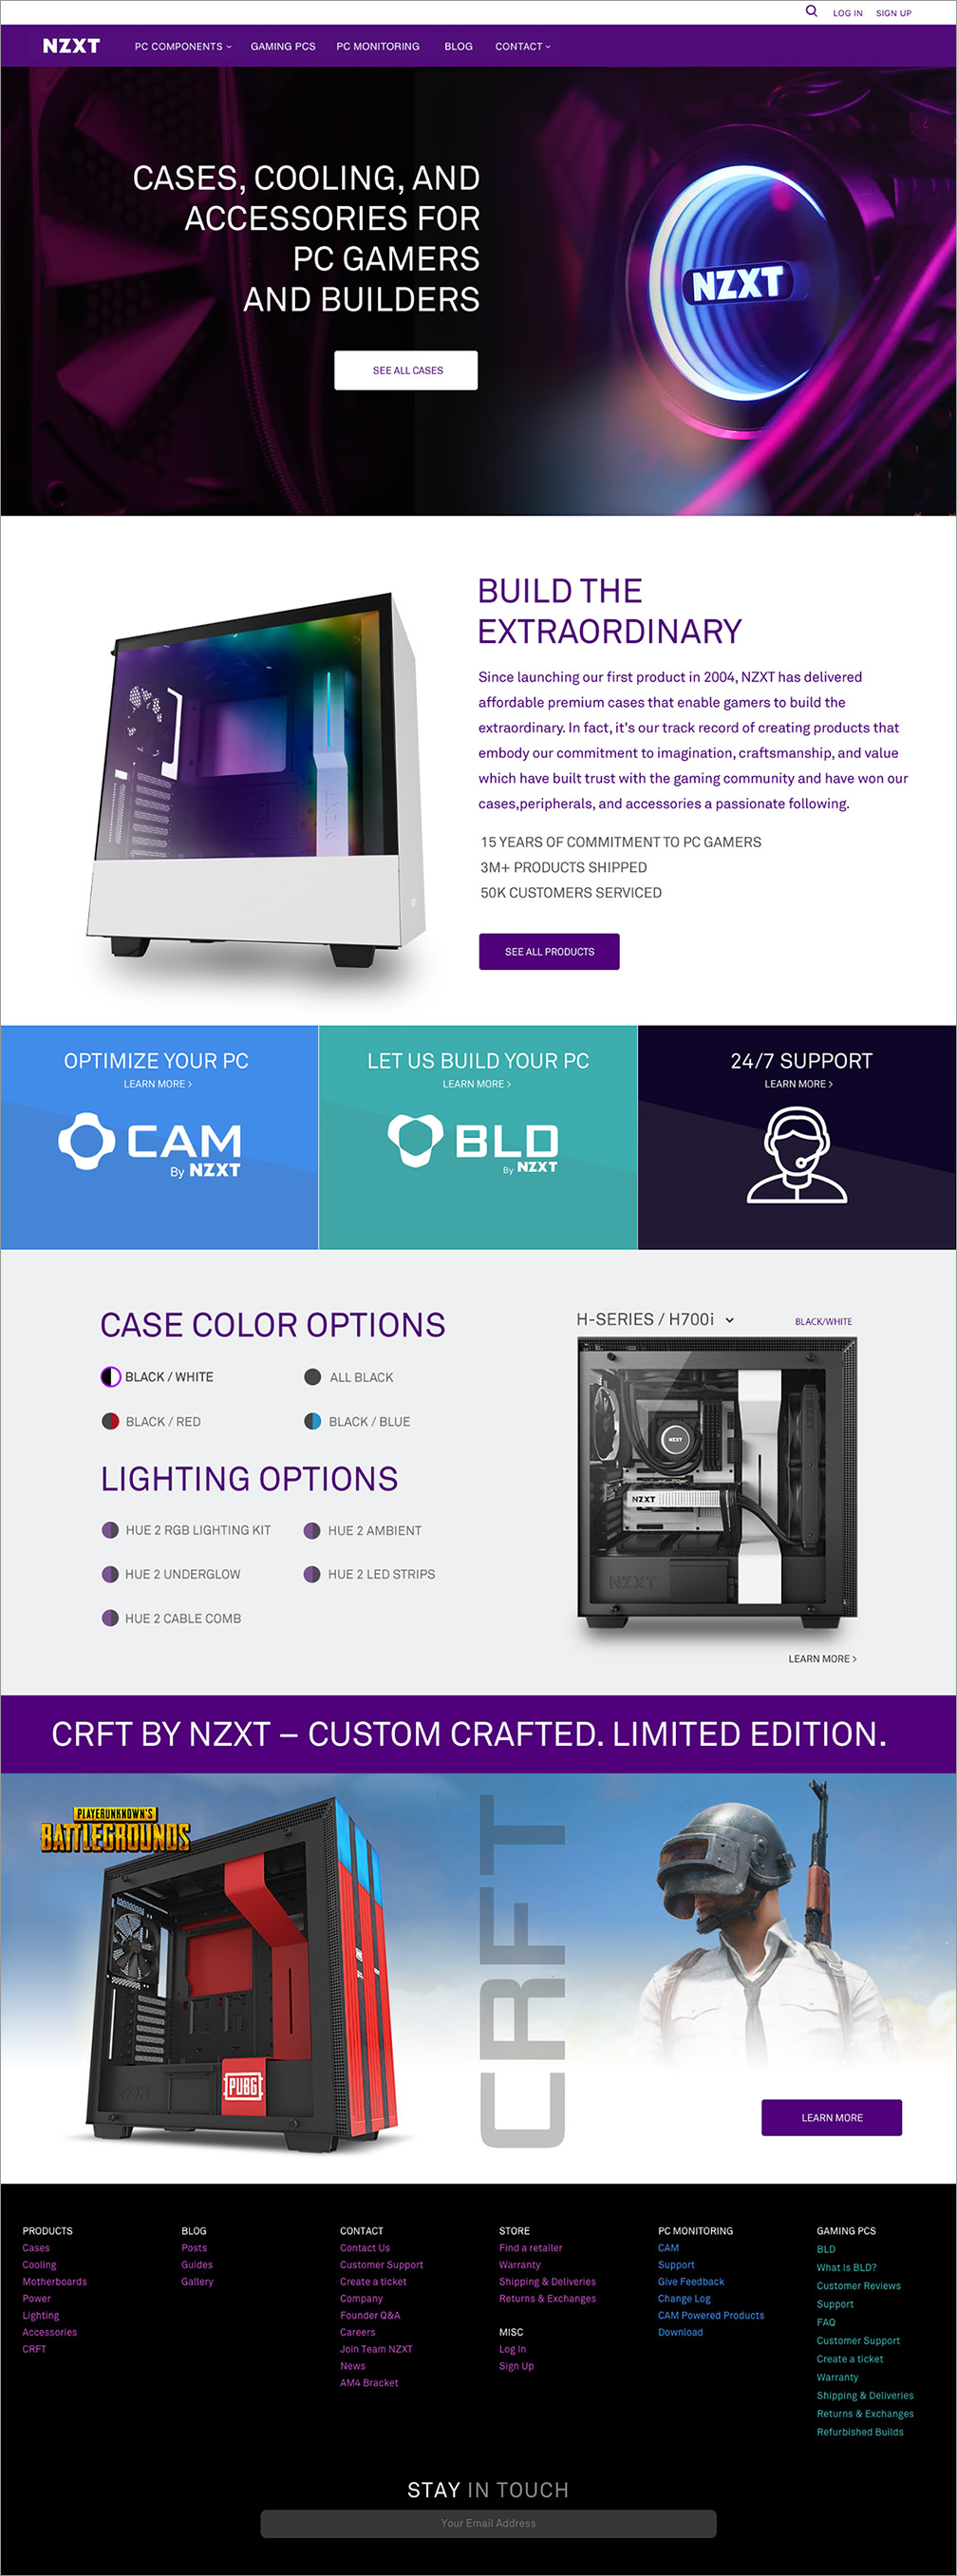 NZXT home page exploration